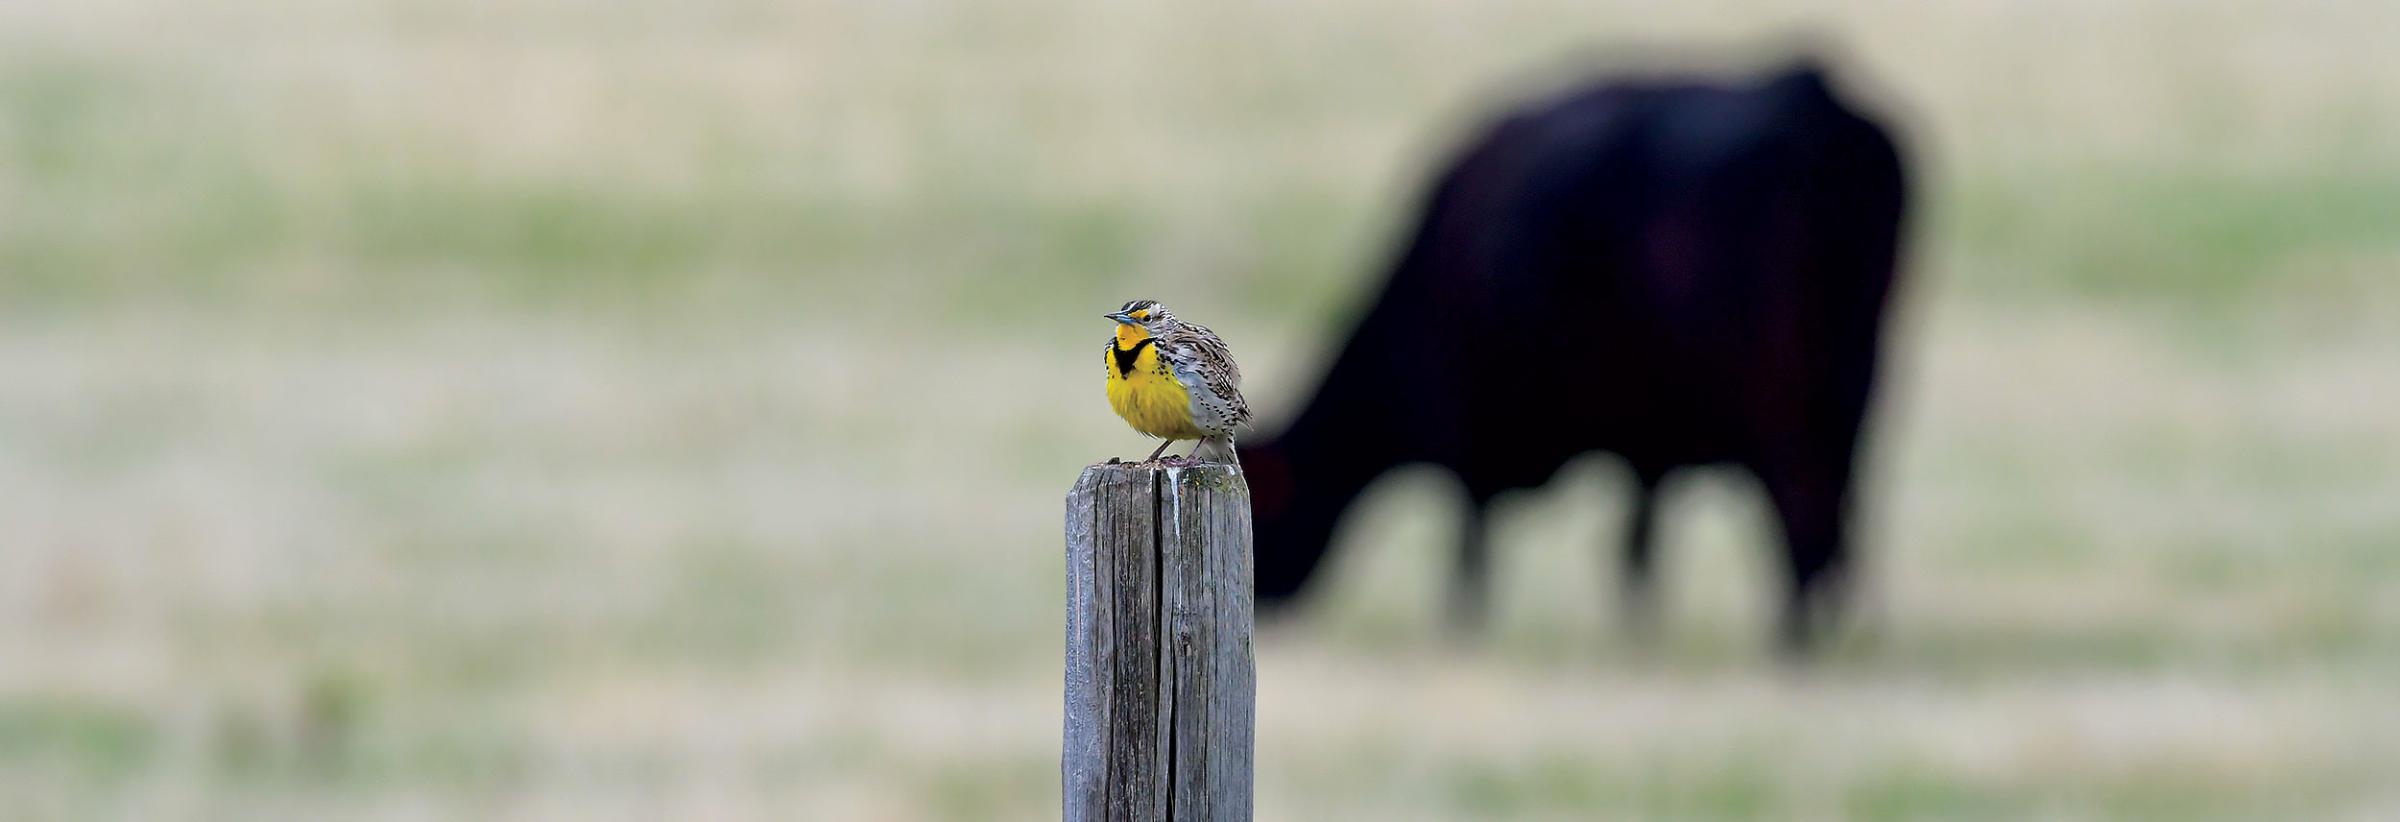 Meadowlark on post in front of grazing cow